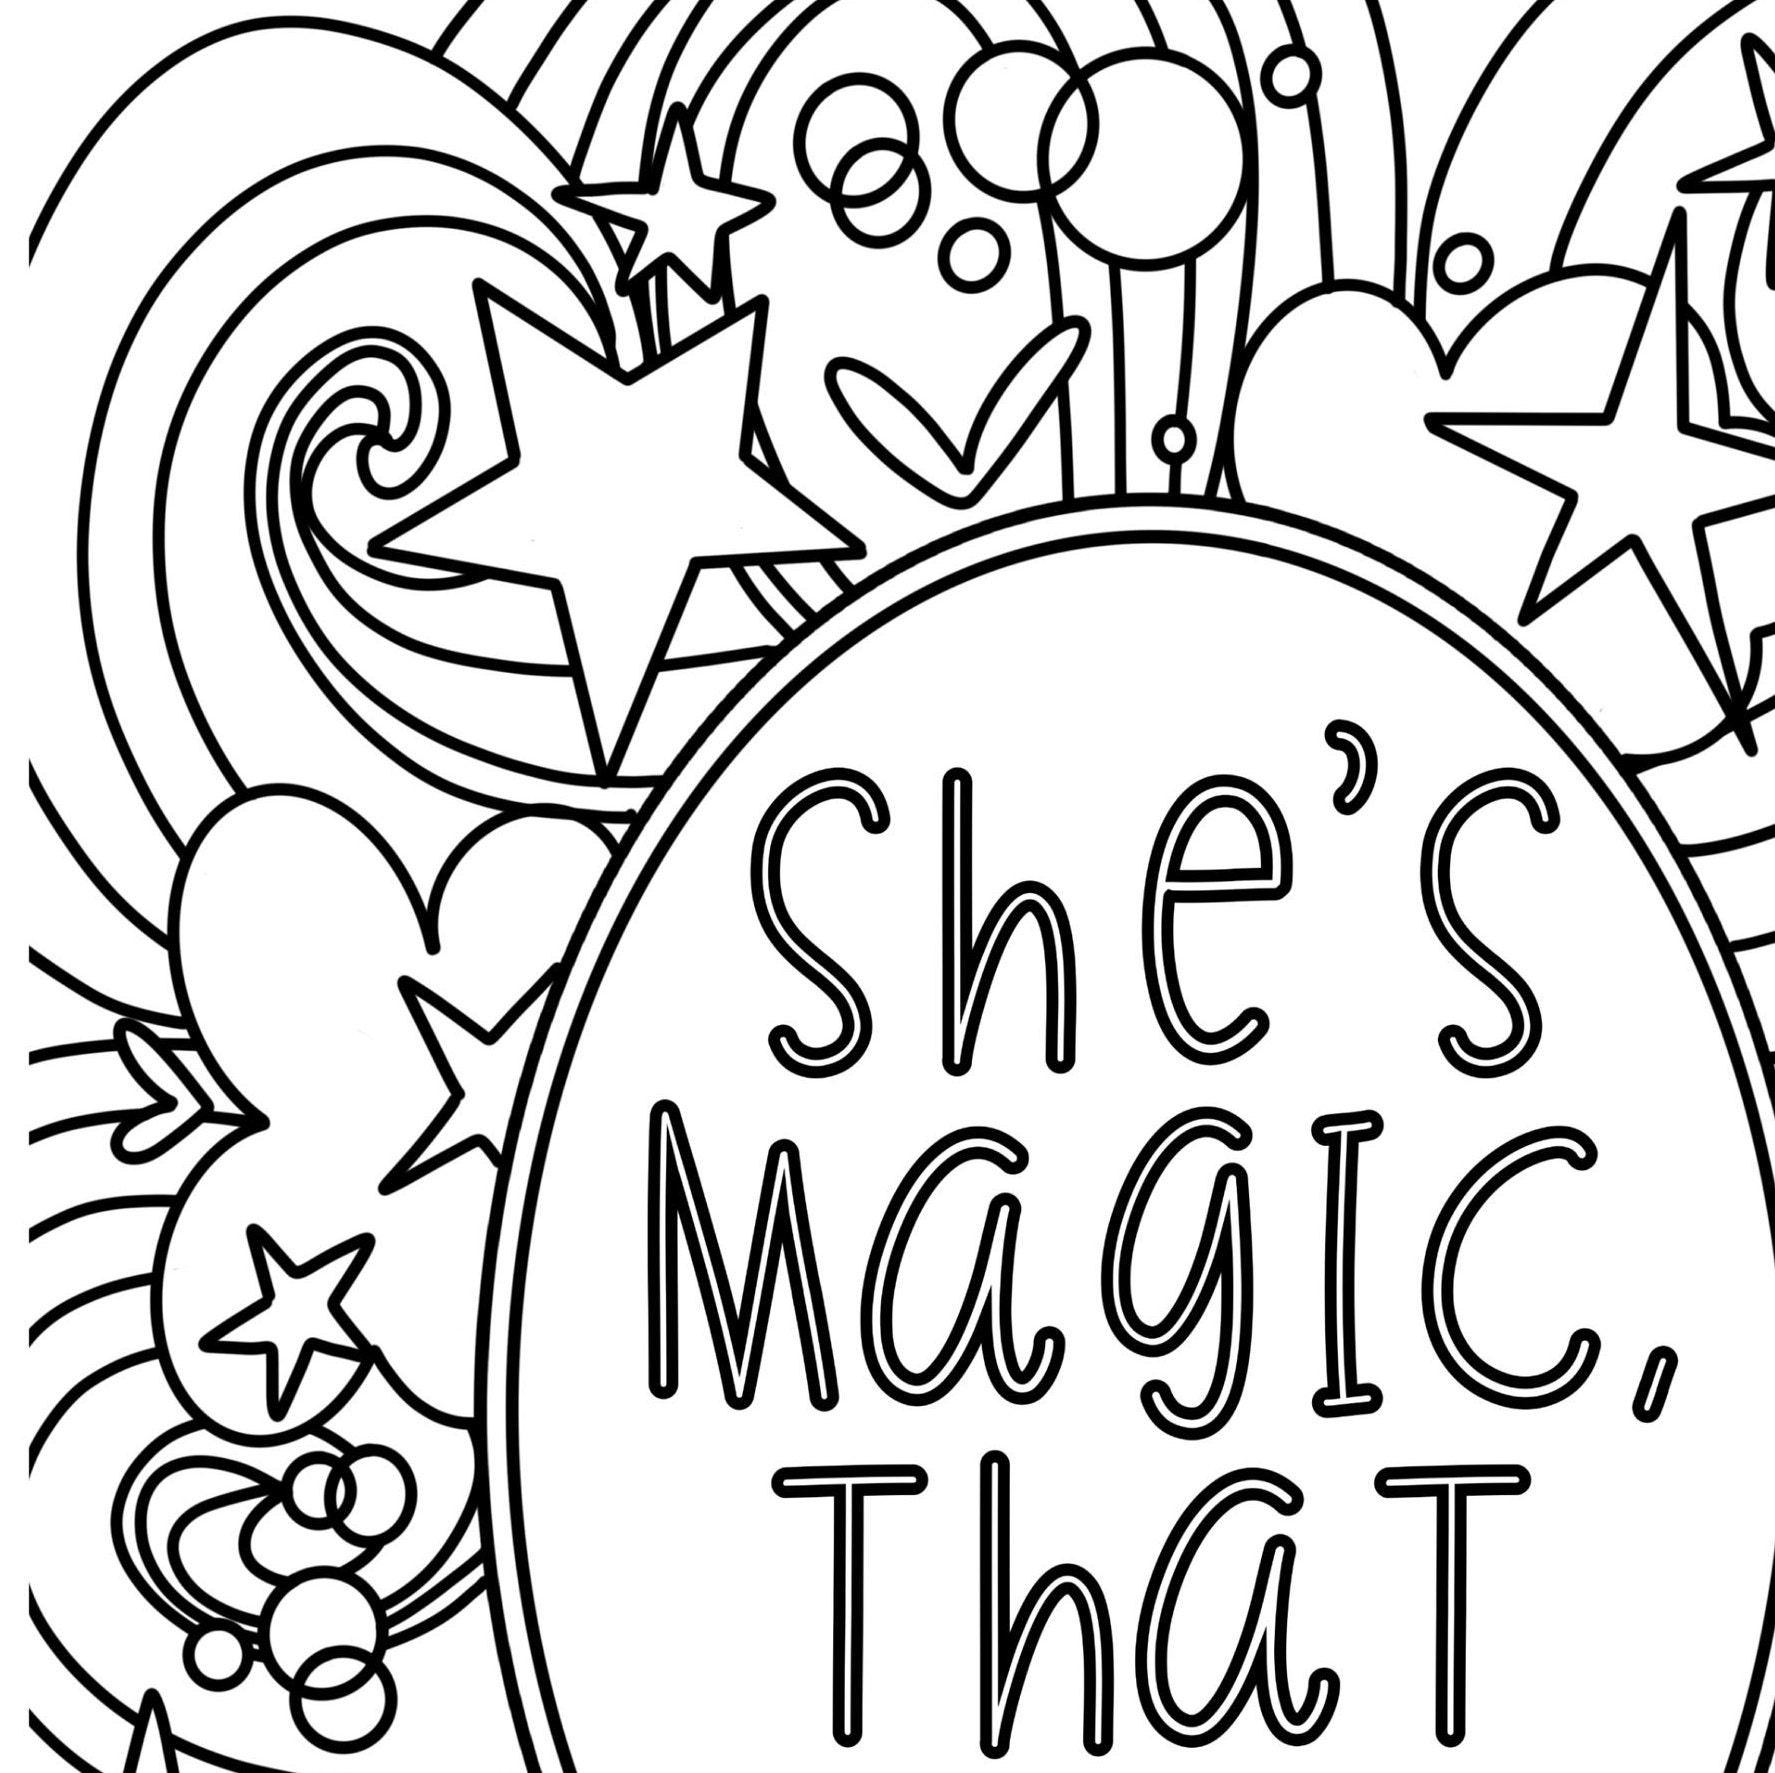 Custom Text Coloring Page Personalized Coloring | Etsy